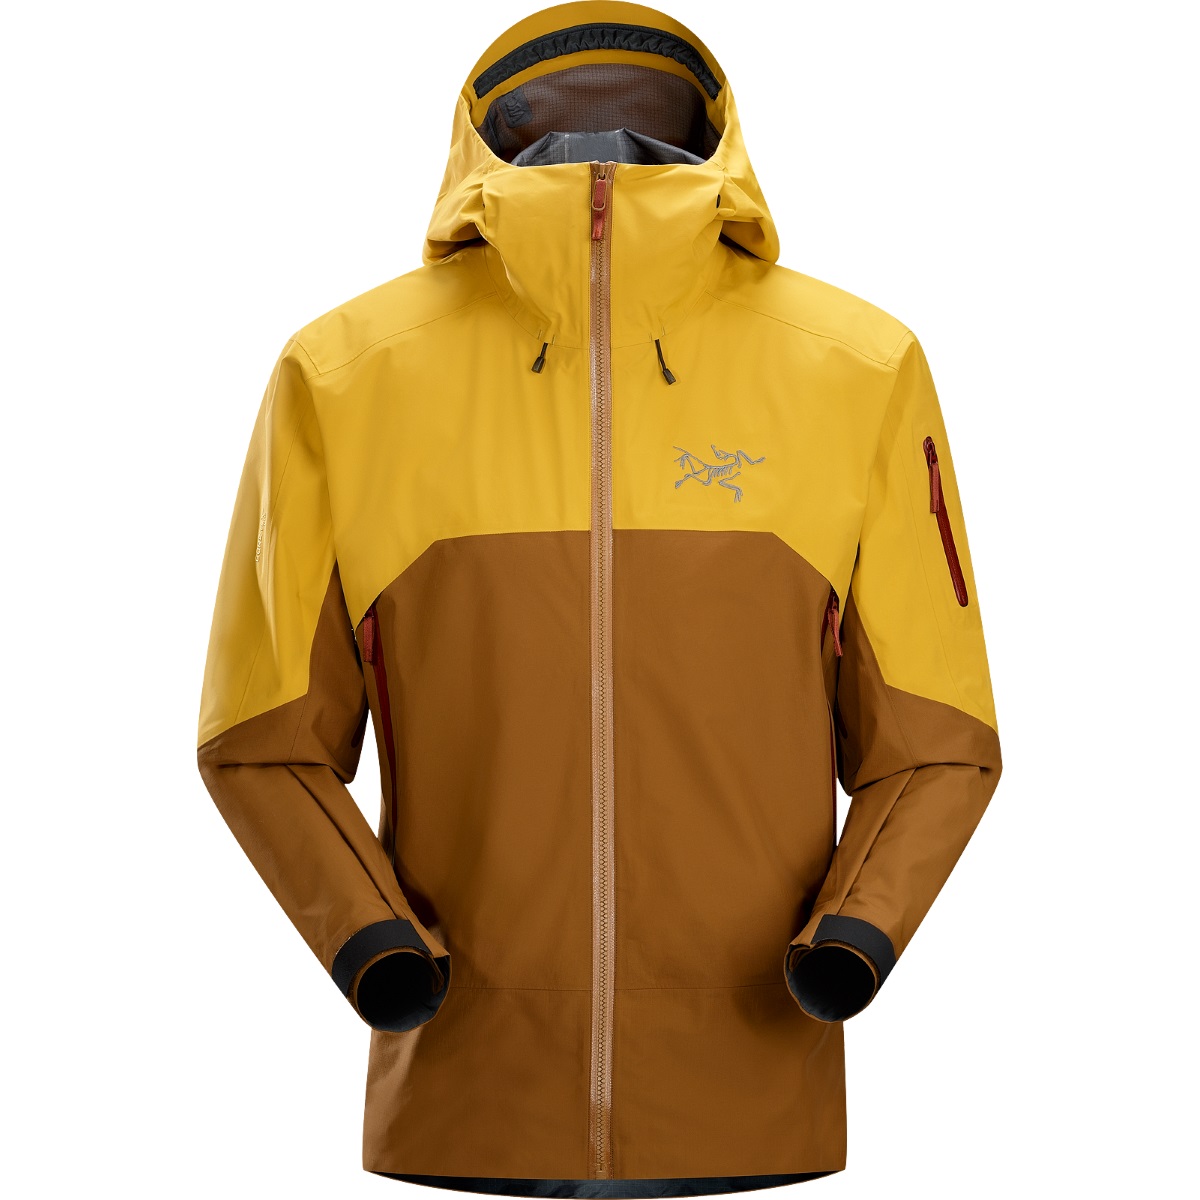 Arc'teryx Rush Jacket, men's, discontinued colors (free ground shipping ...